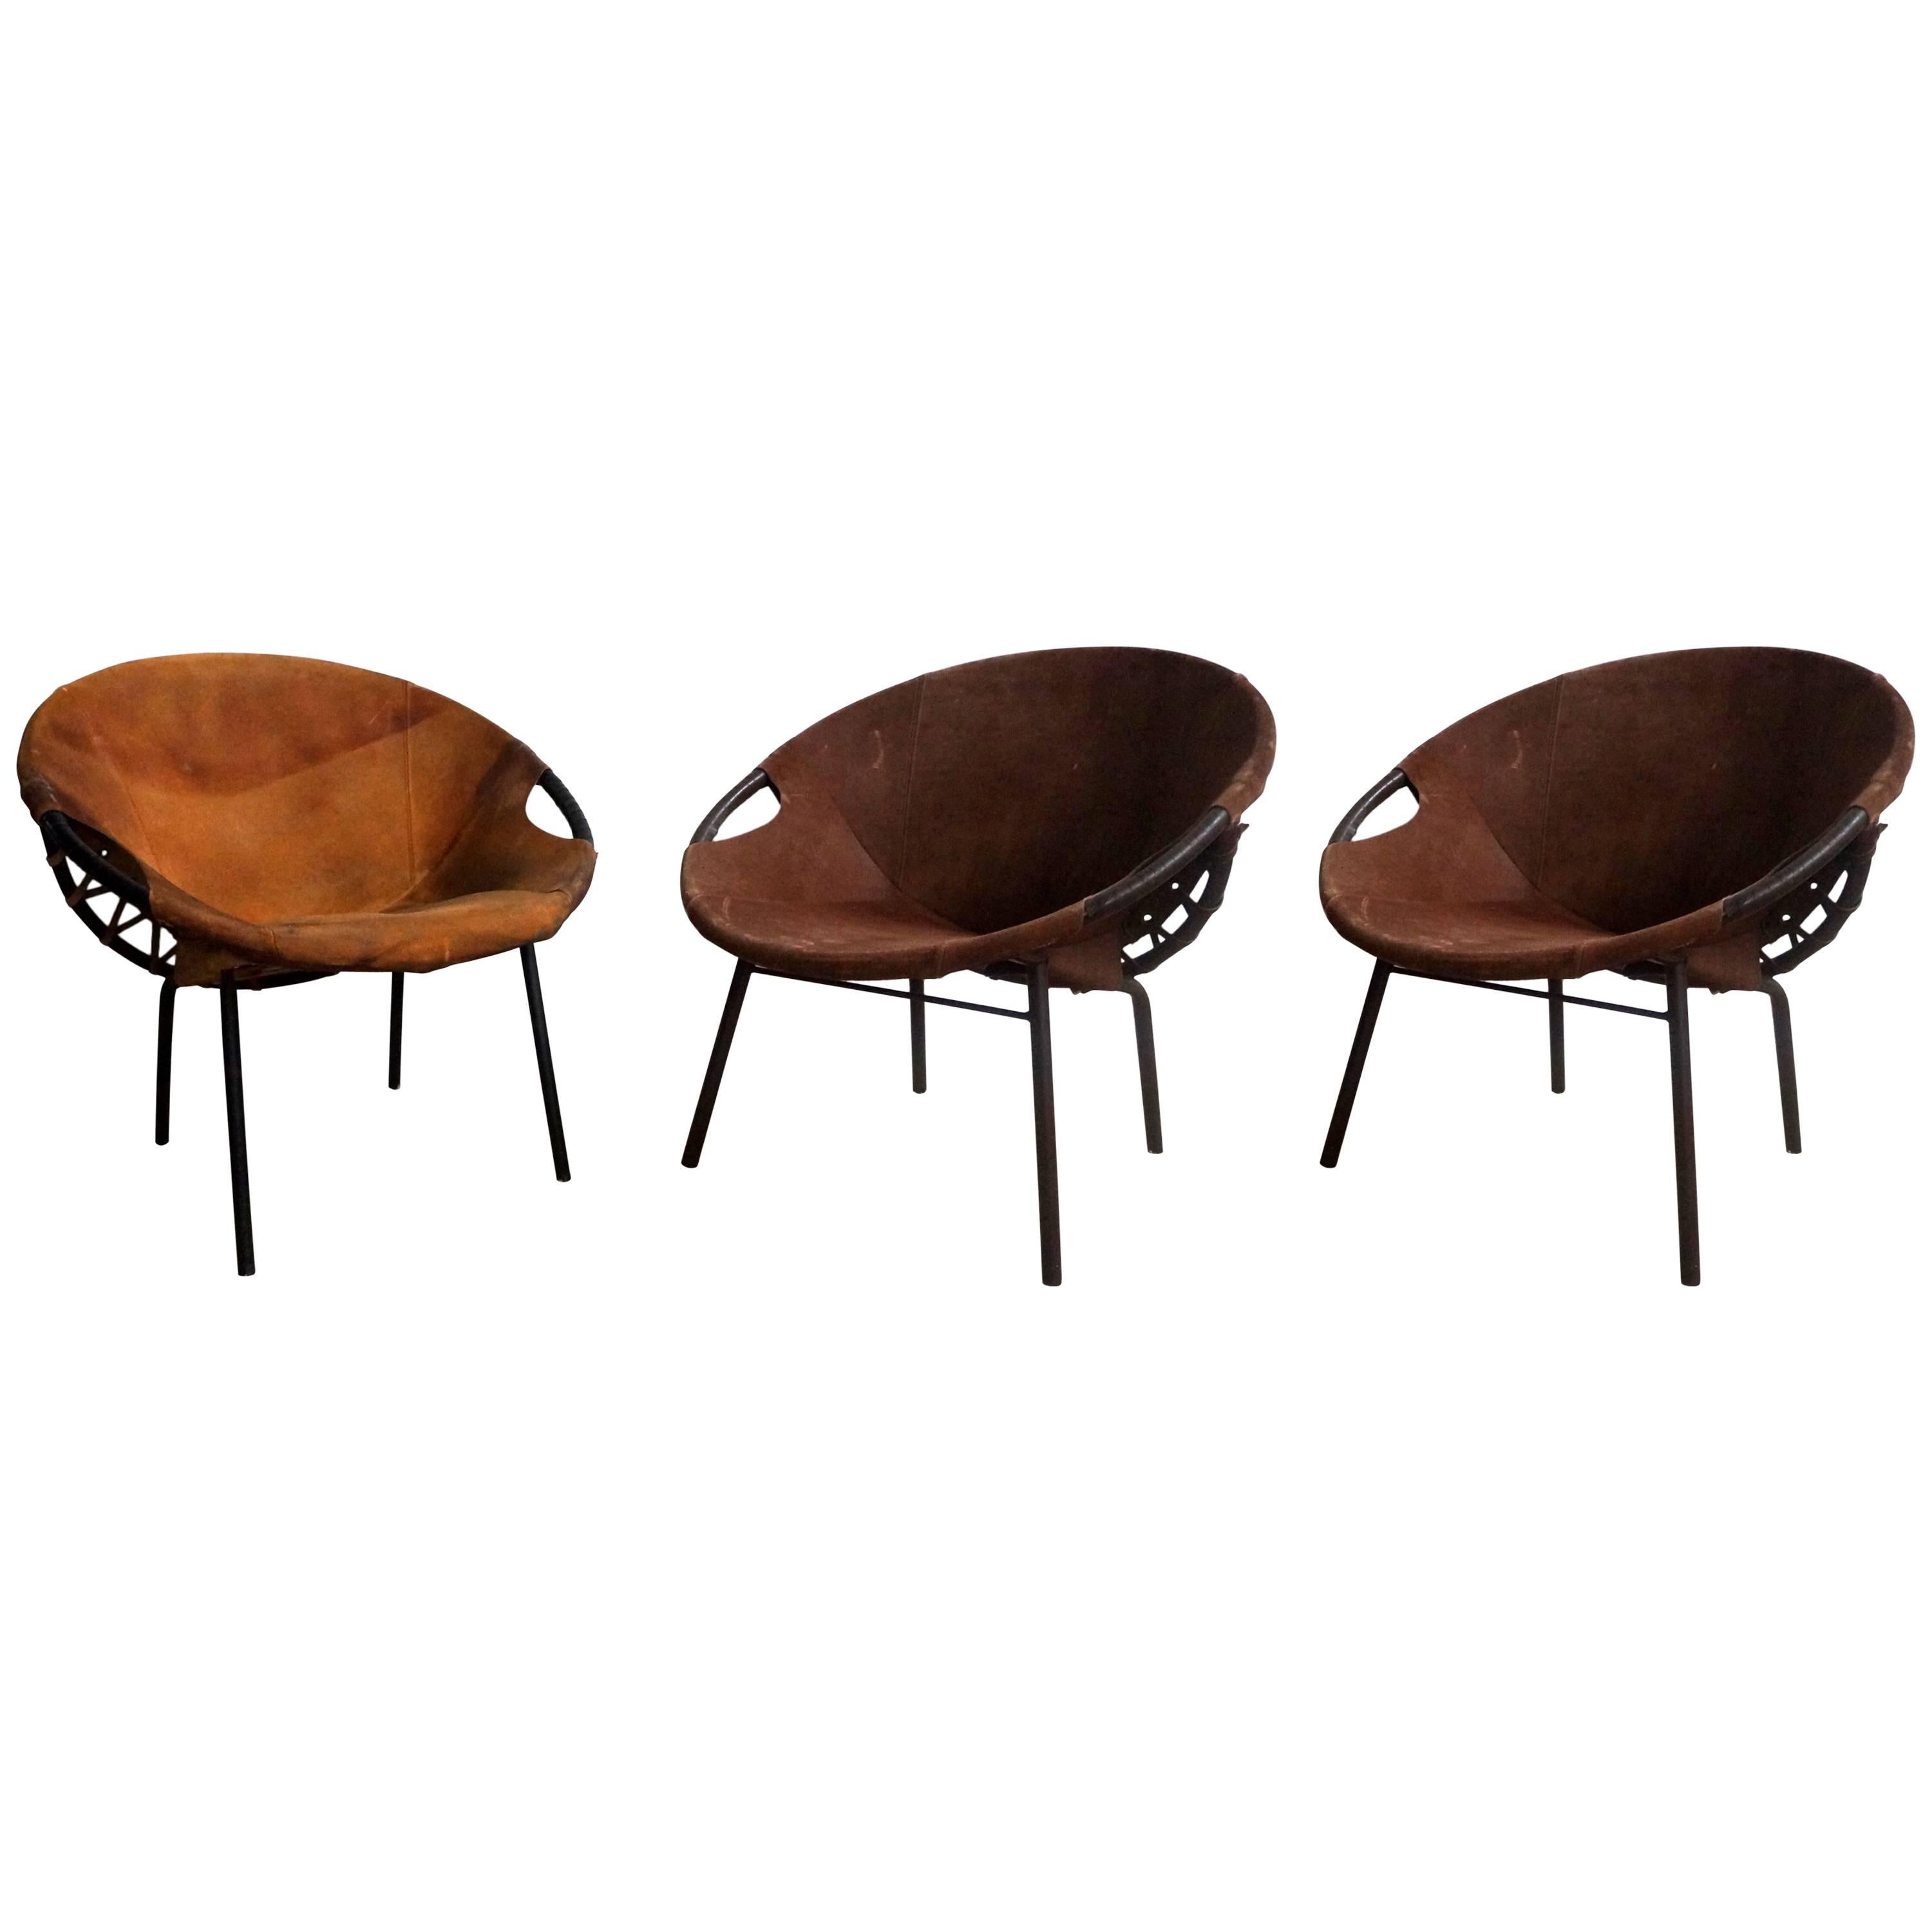 Three Leather Chairs by Lusch Erzeugnis